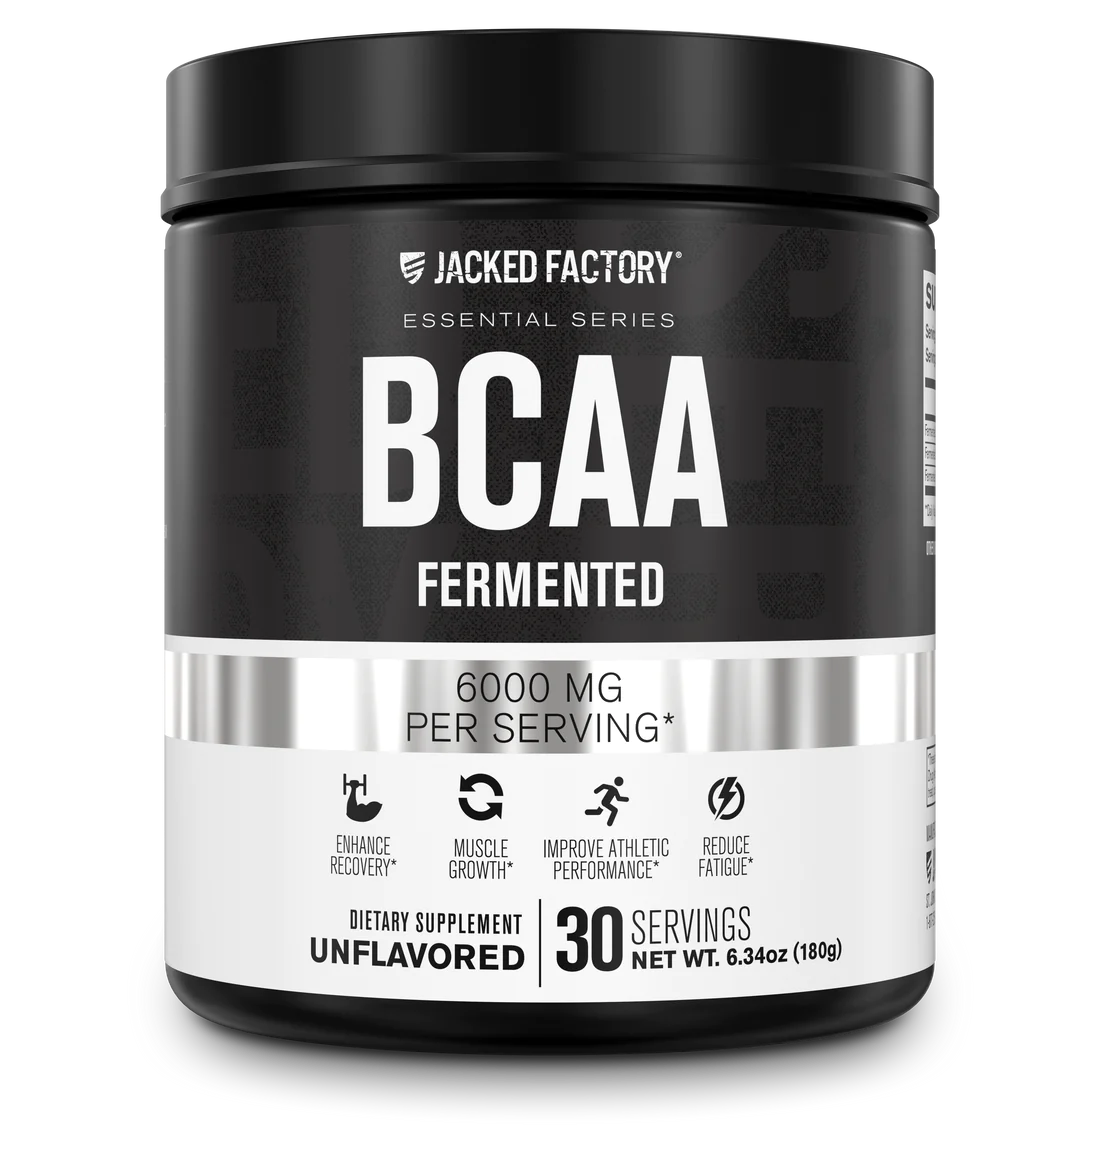 A tub of Jacked Factory Fermented BCAAs. Unflavored Dietary Supplement.